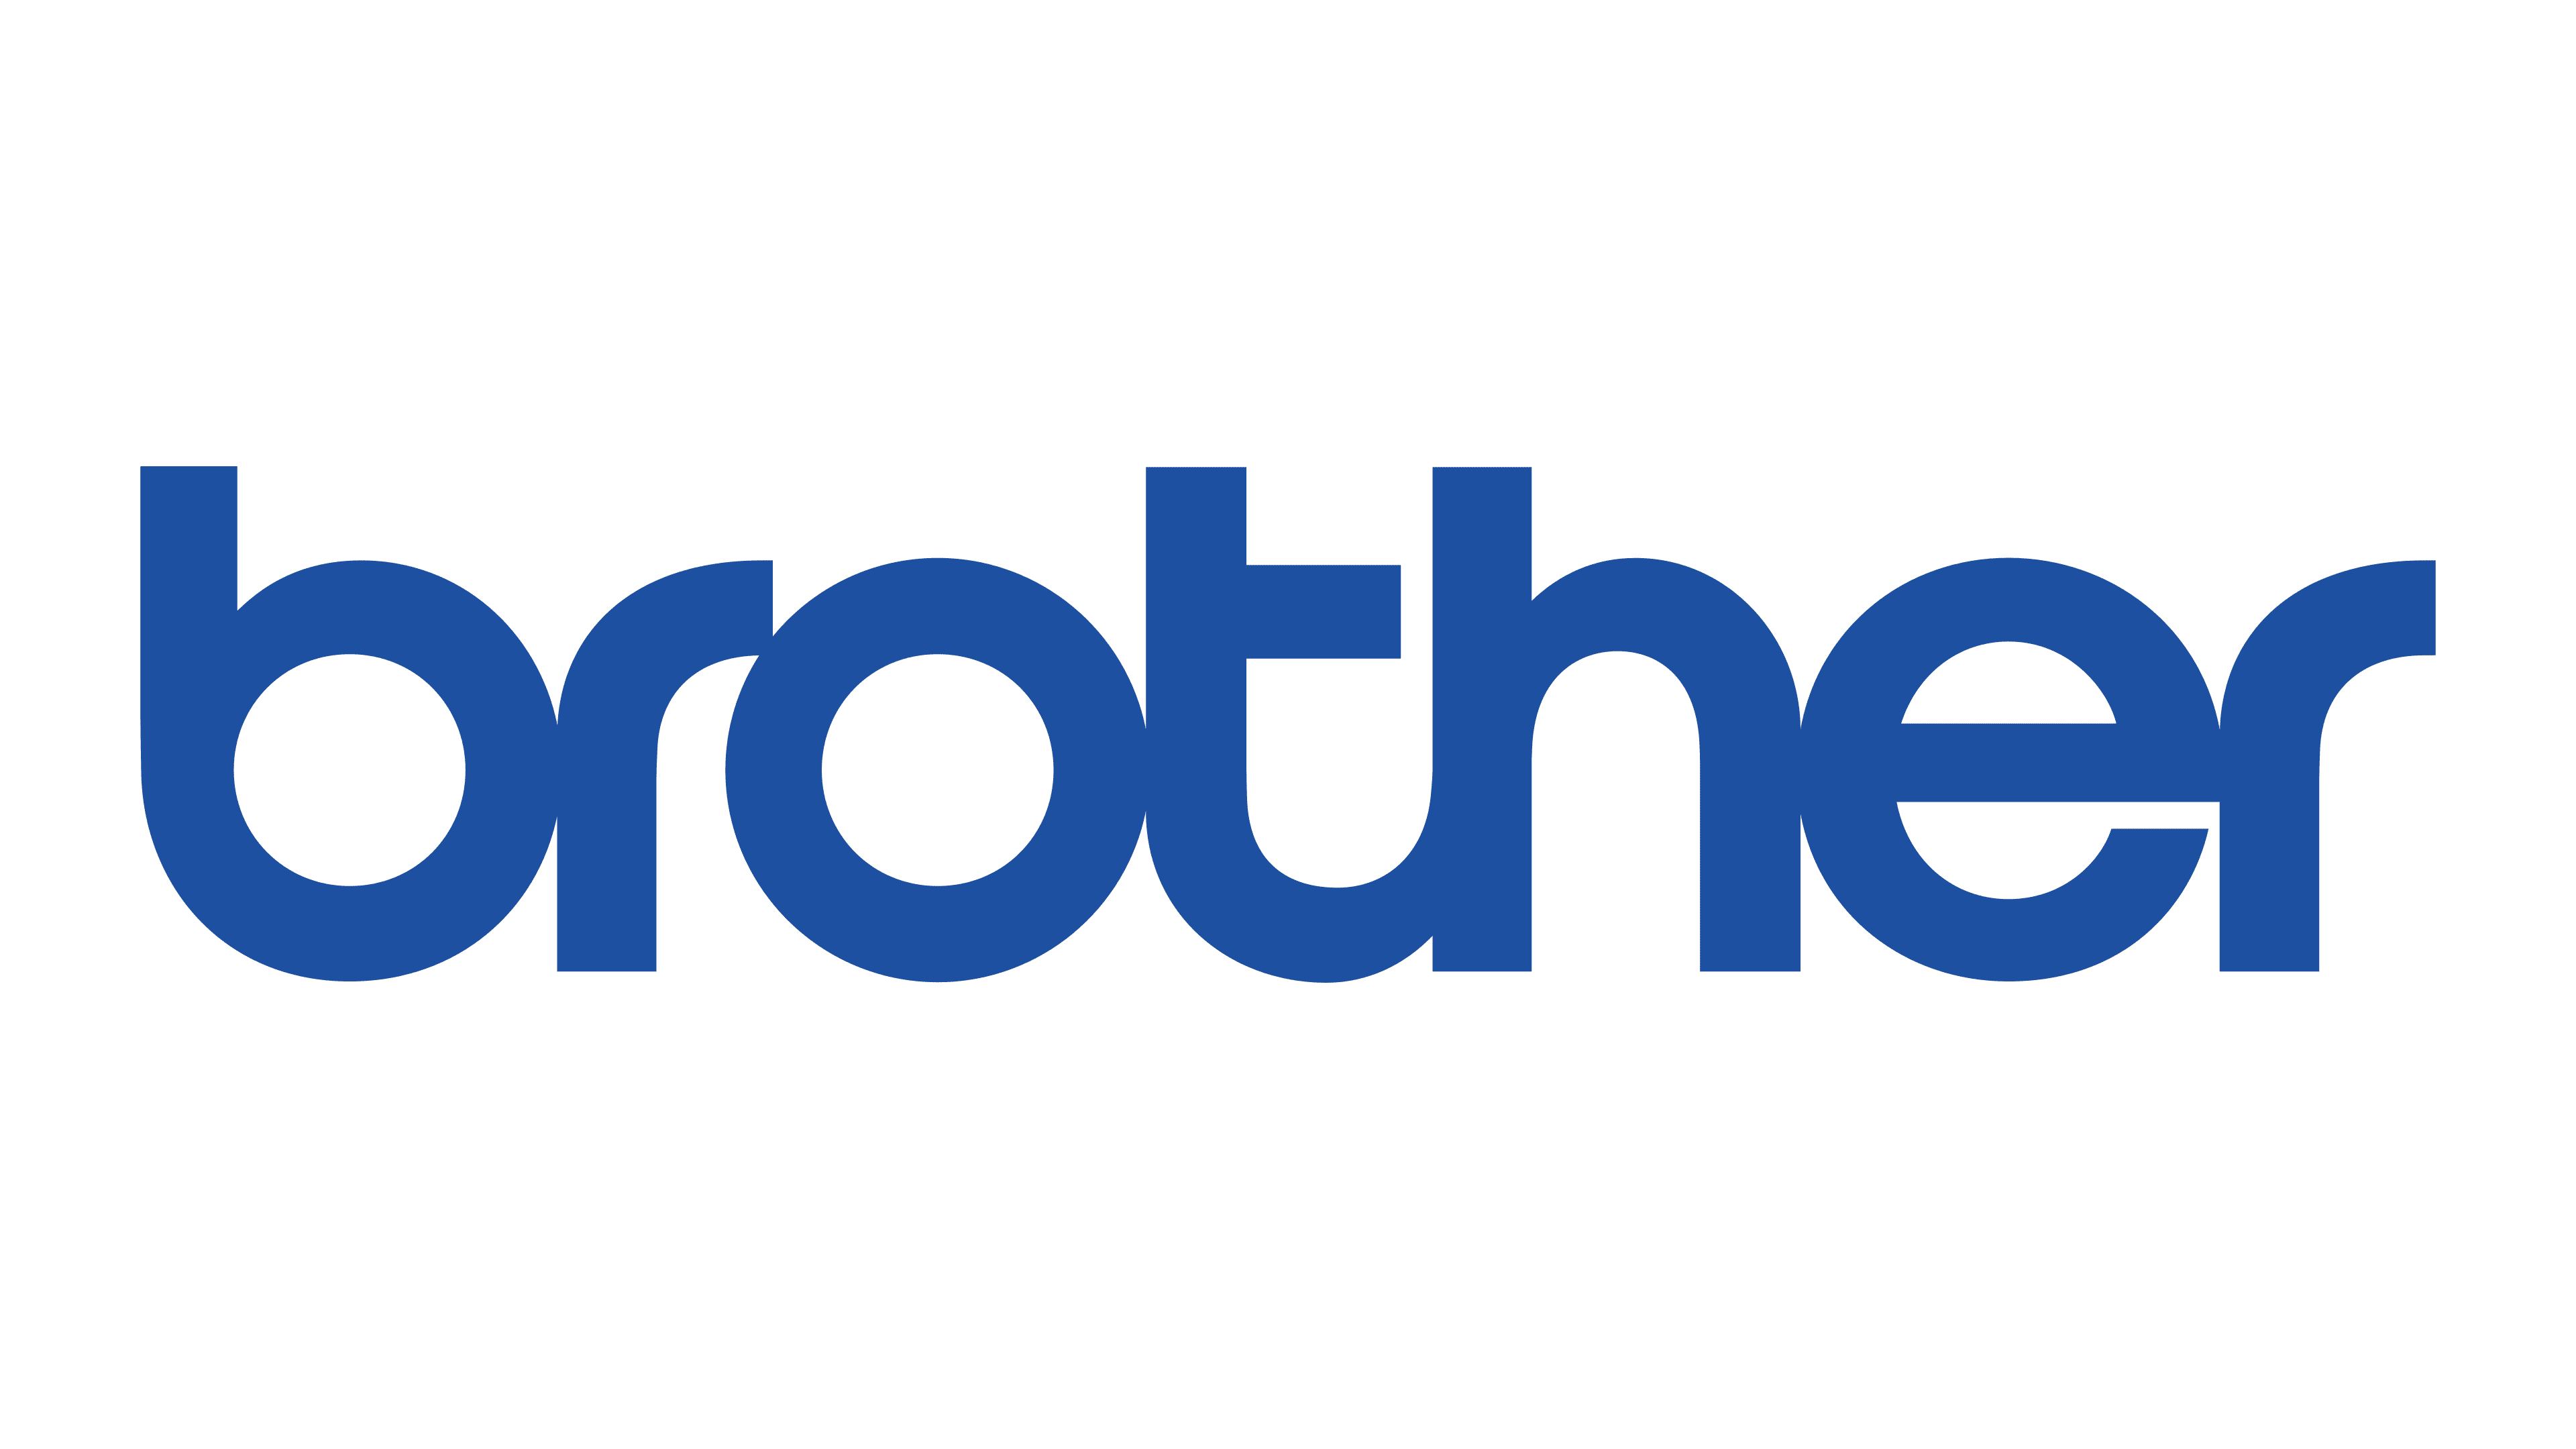 logo-Brother